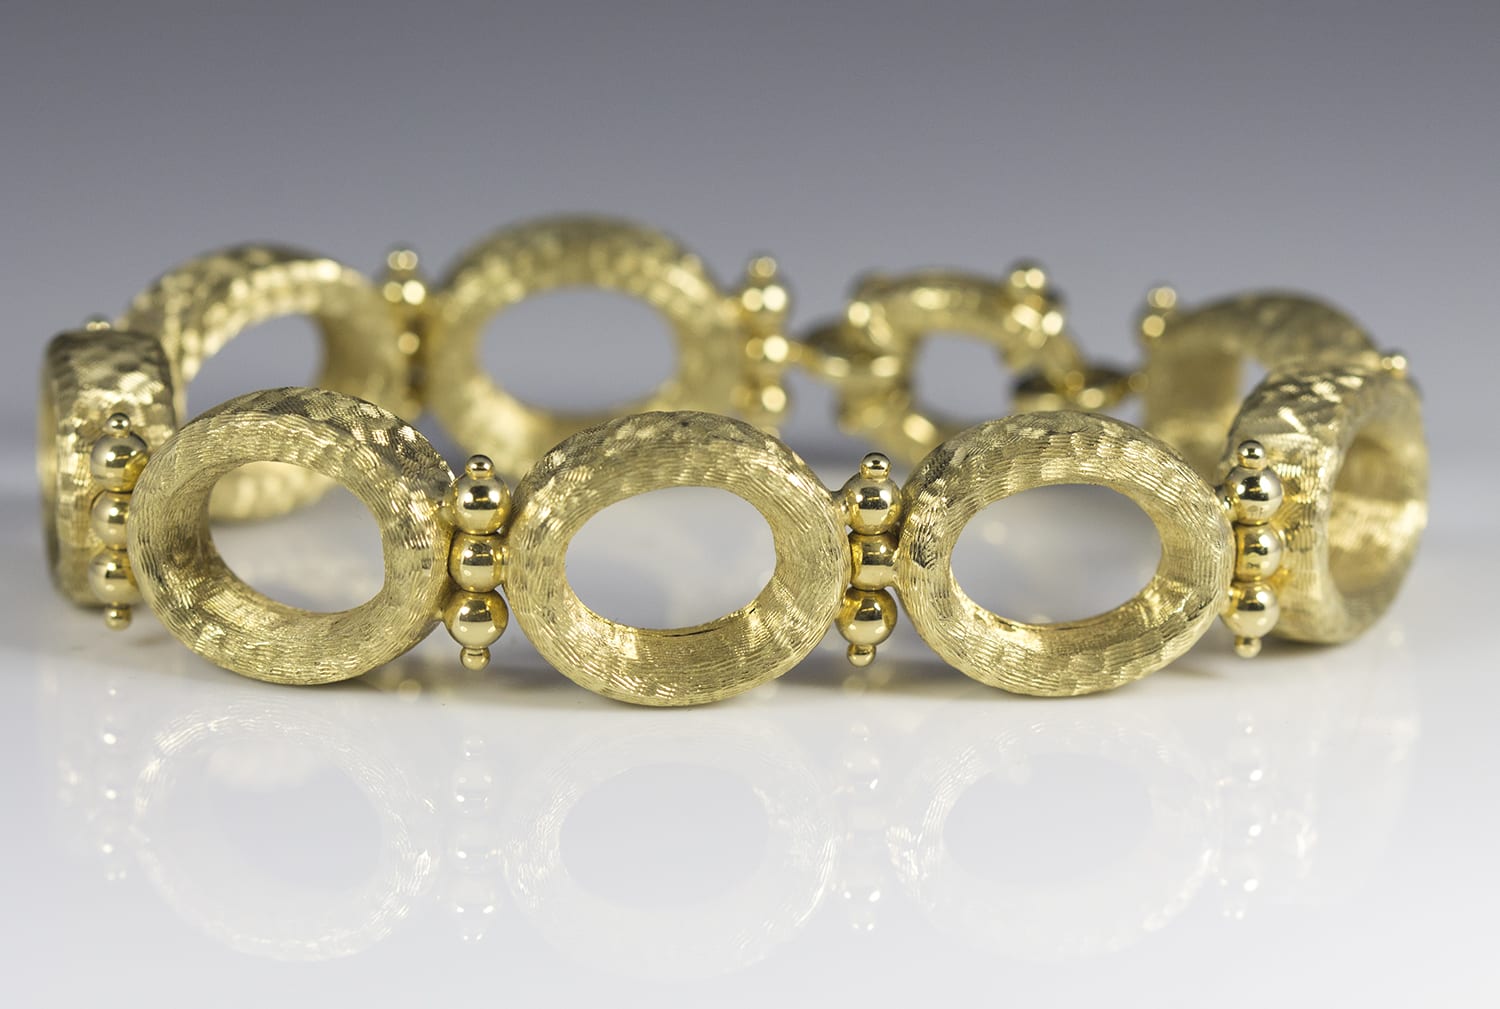 14k Yellow Gold Large Oval Link Bracelet w/ Florentine Finish Alternating  with 3 Vertical Gold Ball Links - G114